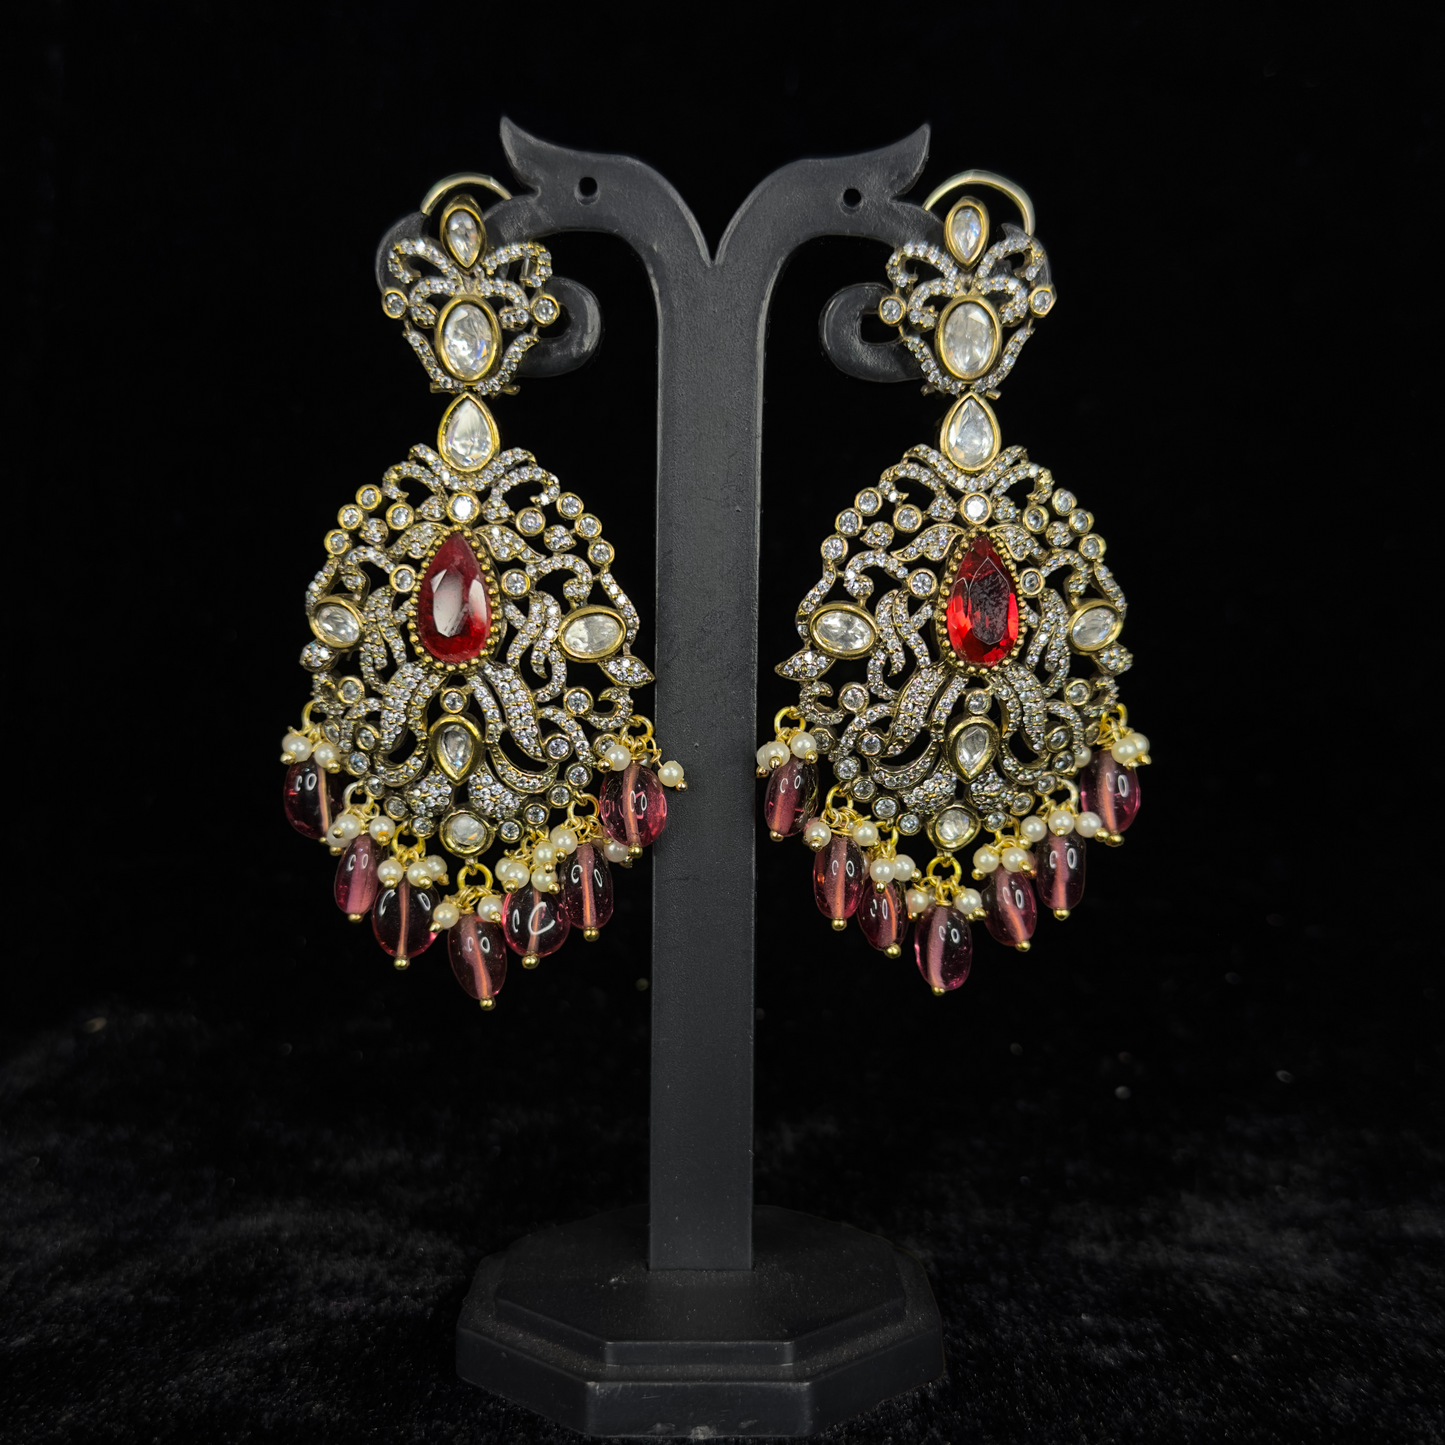 Victorian Zircon Earrings with onyx beads & pearls